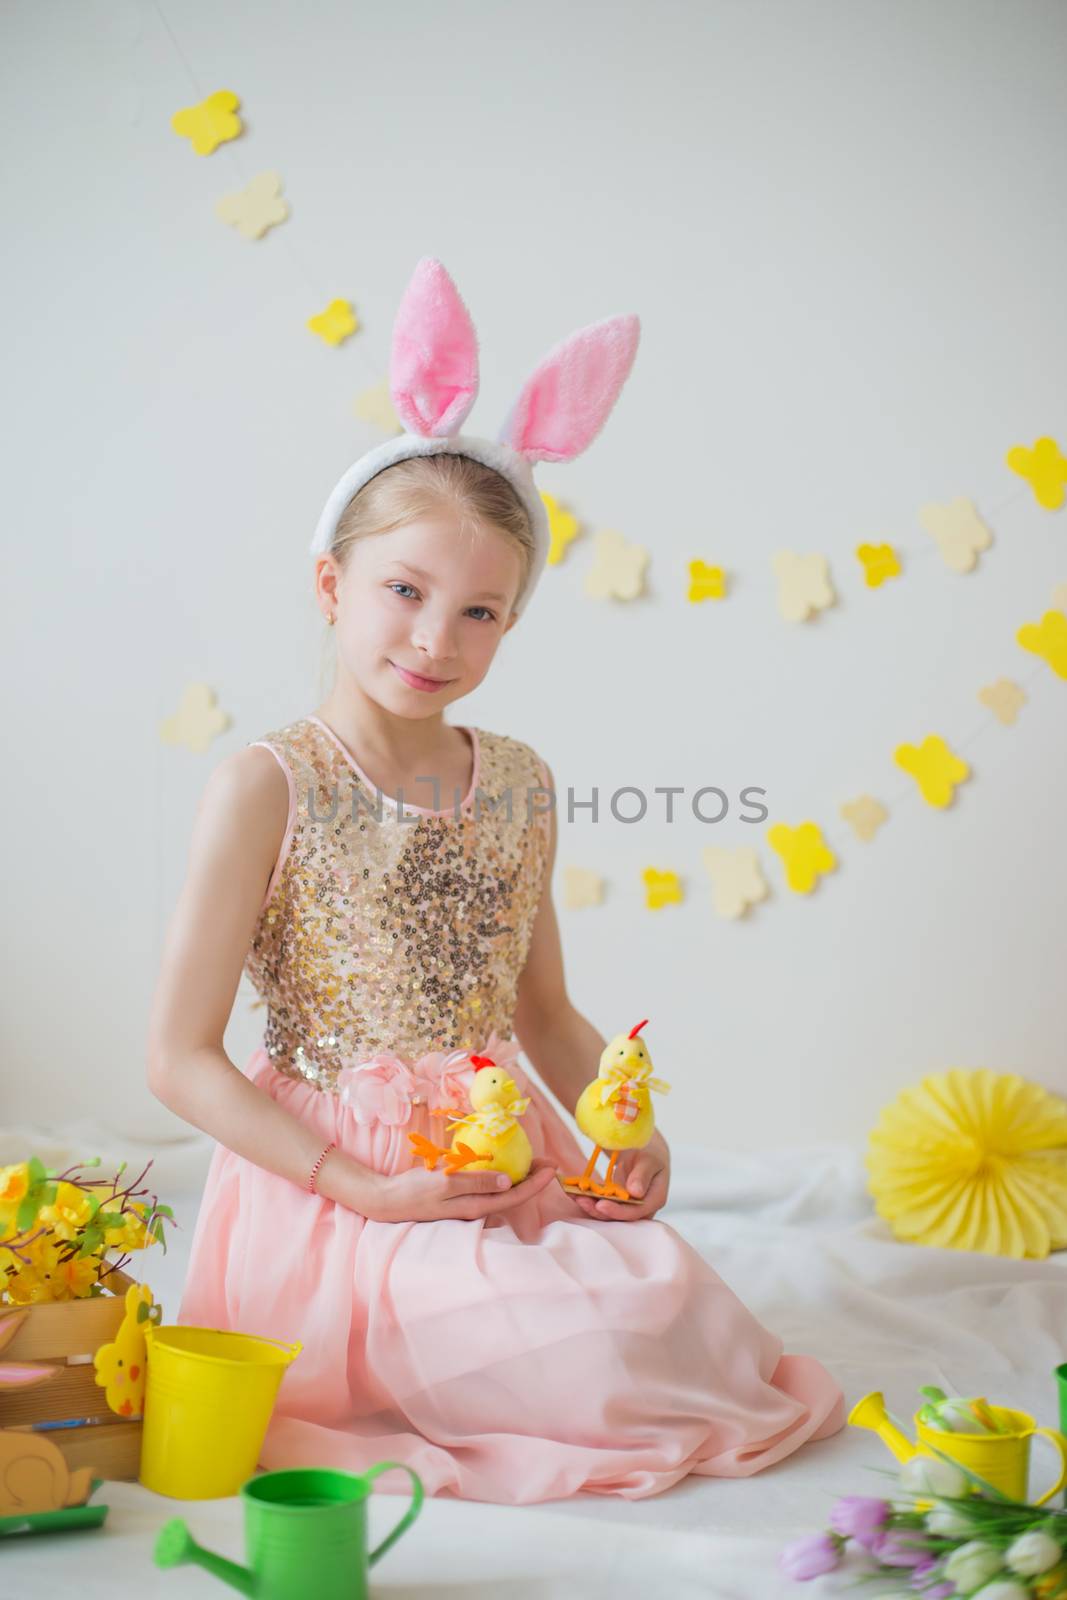 Cute little girl with bunny ears painting eggs, Easter decoration